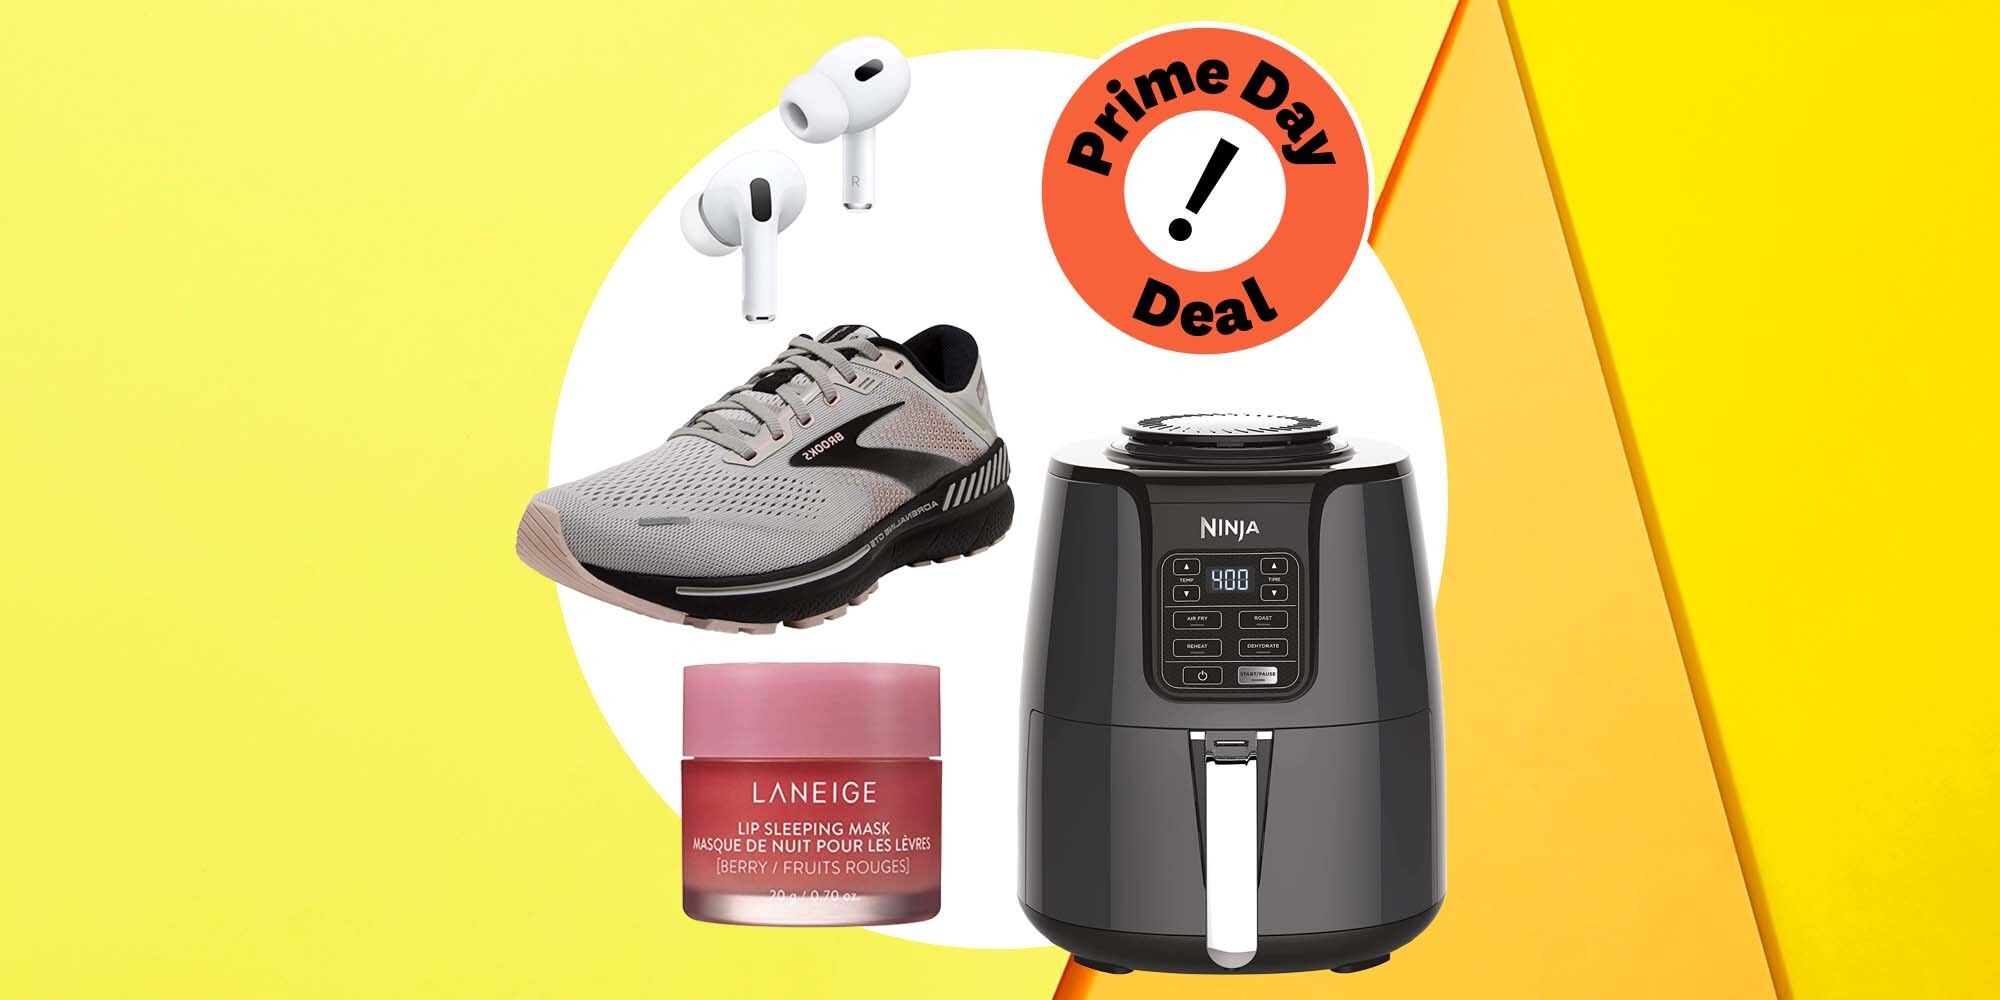 39 last-minute Prime Day deals on athleisure to score before midnight